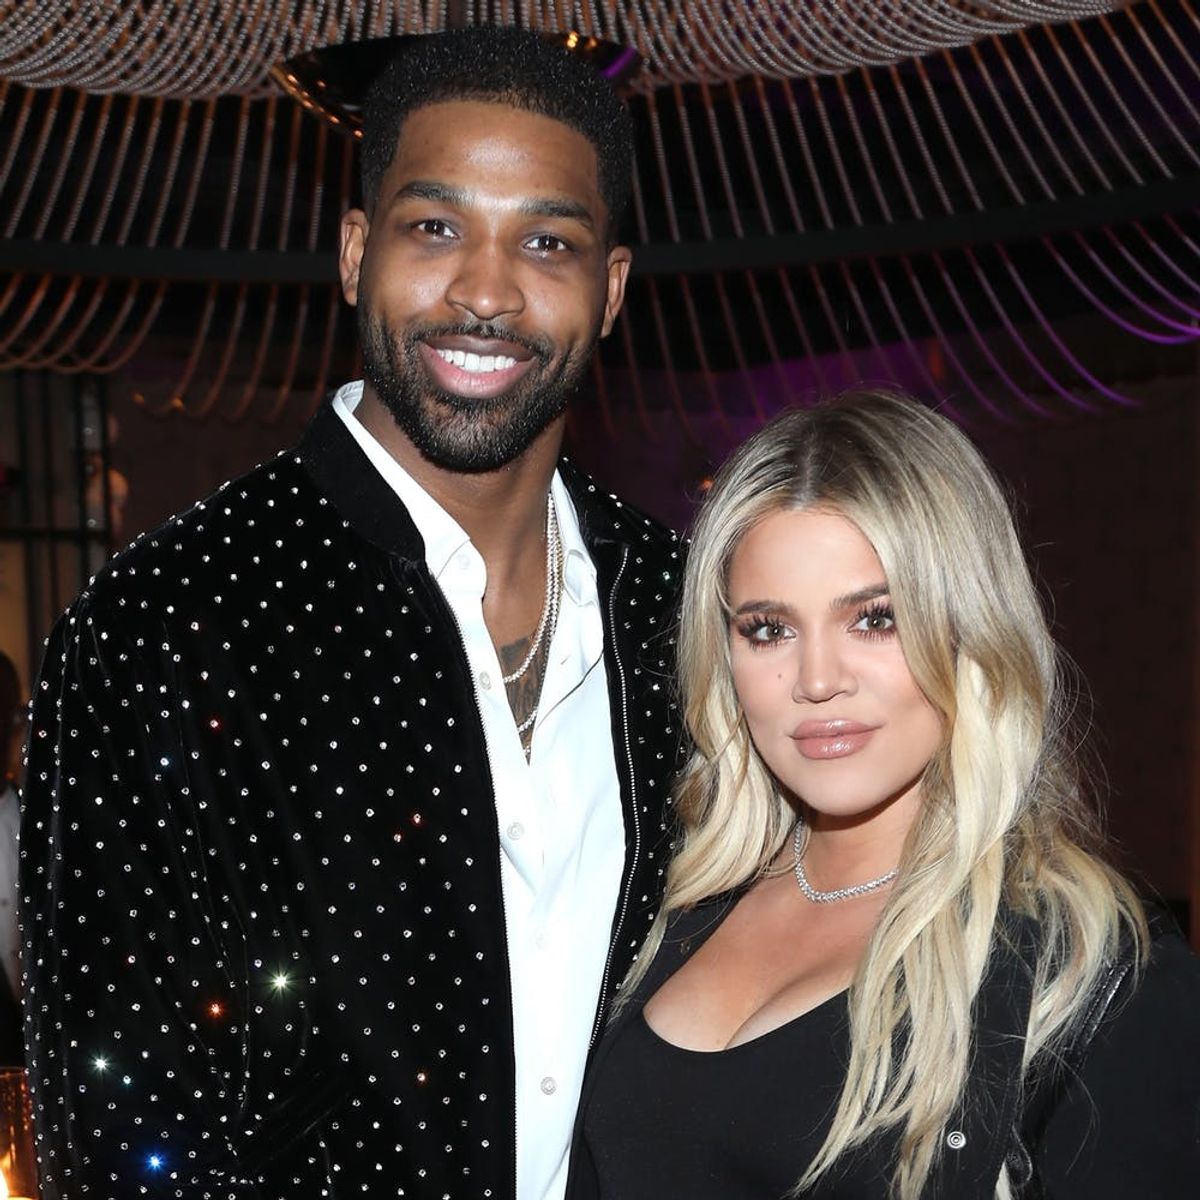 Khloé Kardashian Just Revealed the Sex of Her Baby!